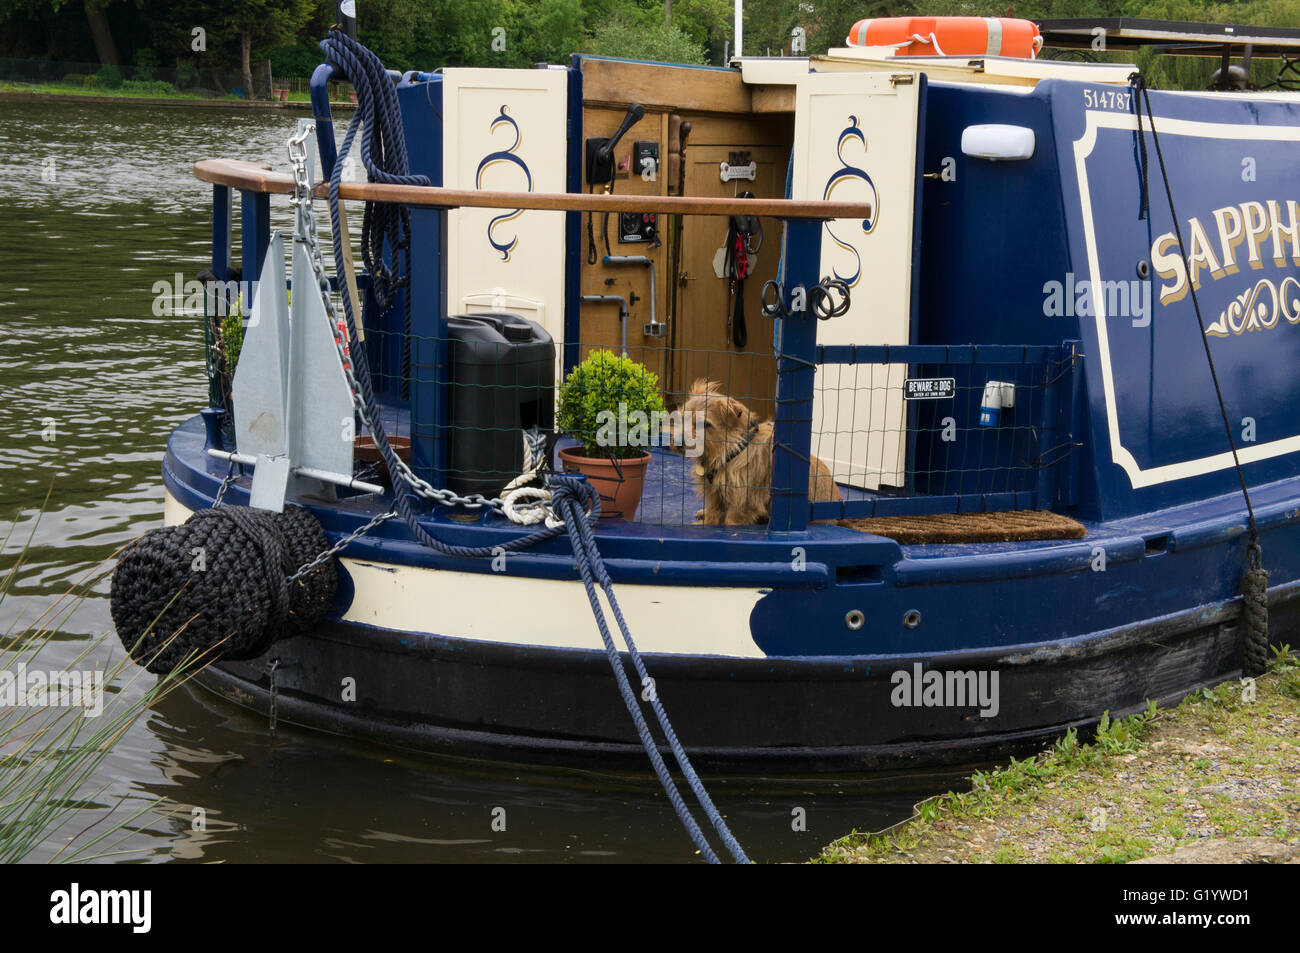 Irony and humour! - a small dog sits by 'Beware of the dog' sign, aboard a canal boat moored on the River Thames, Marlow, Buckinghamshire, England. Stock Photo